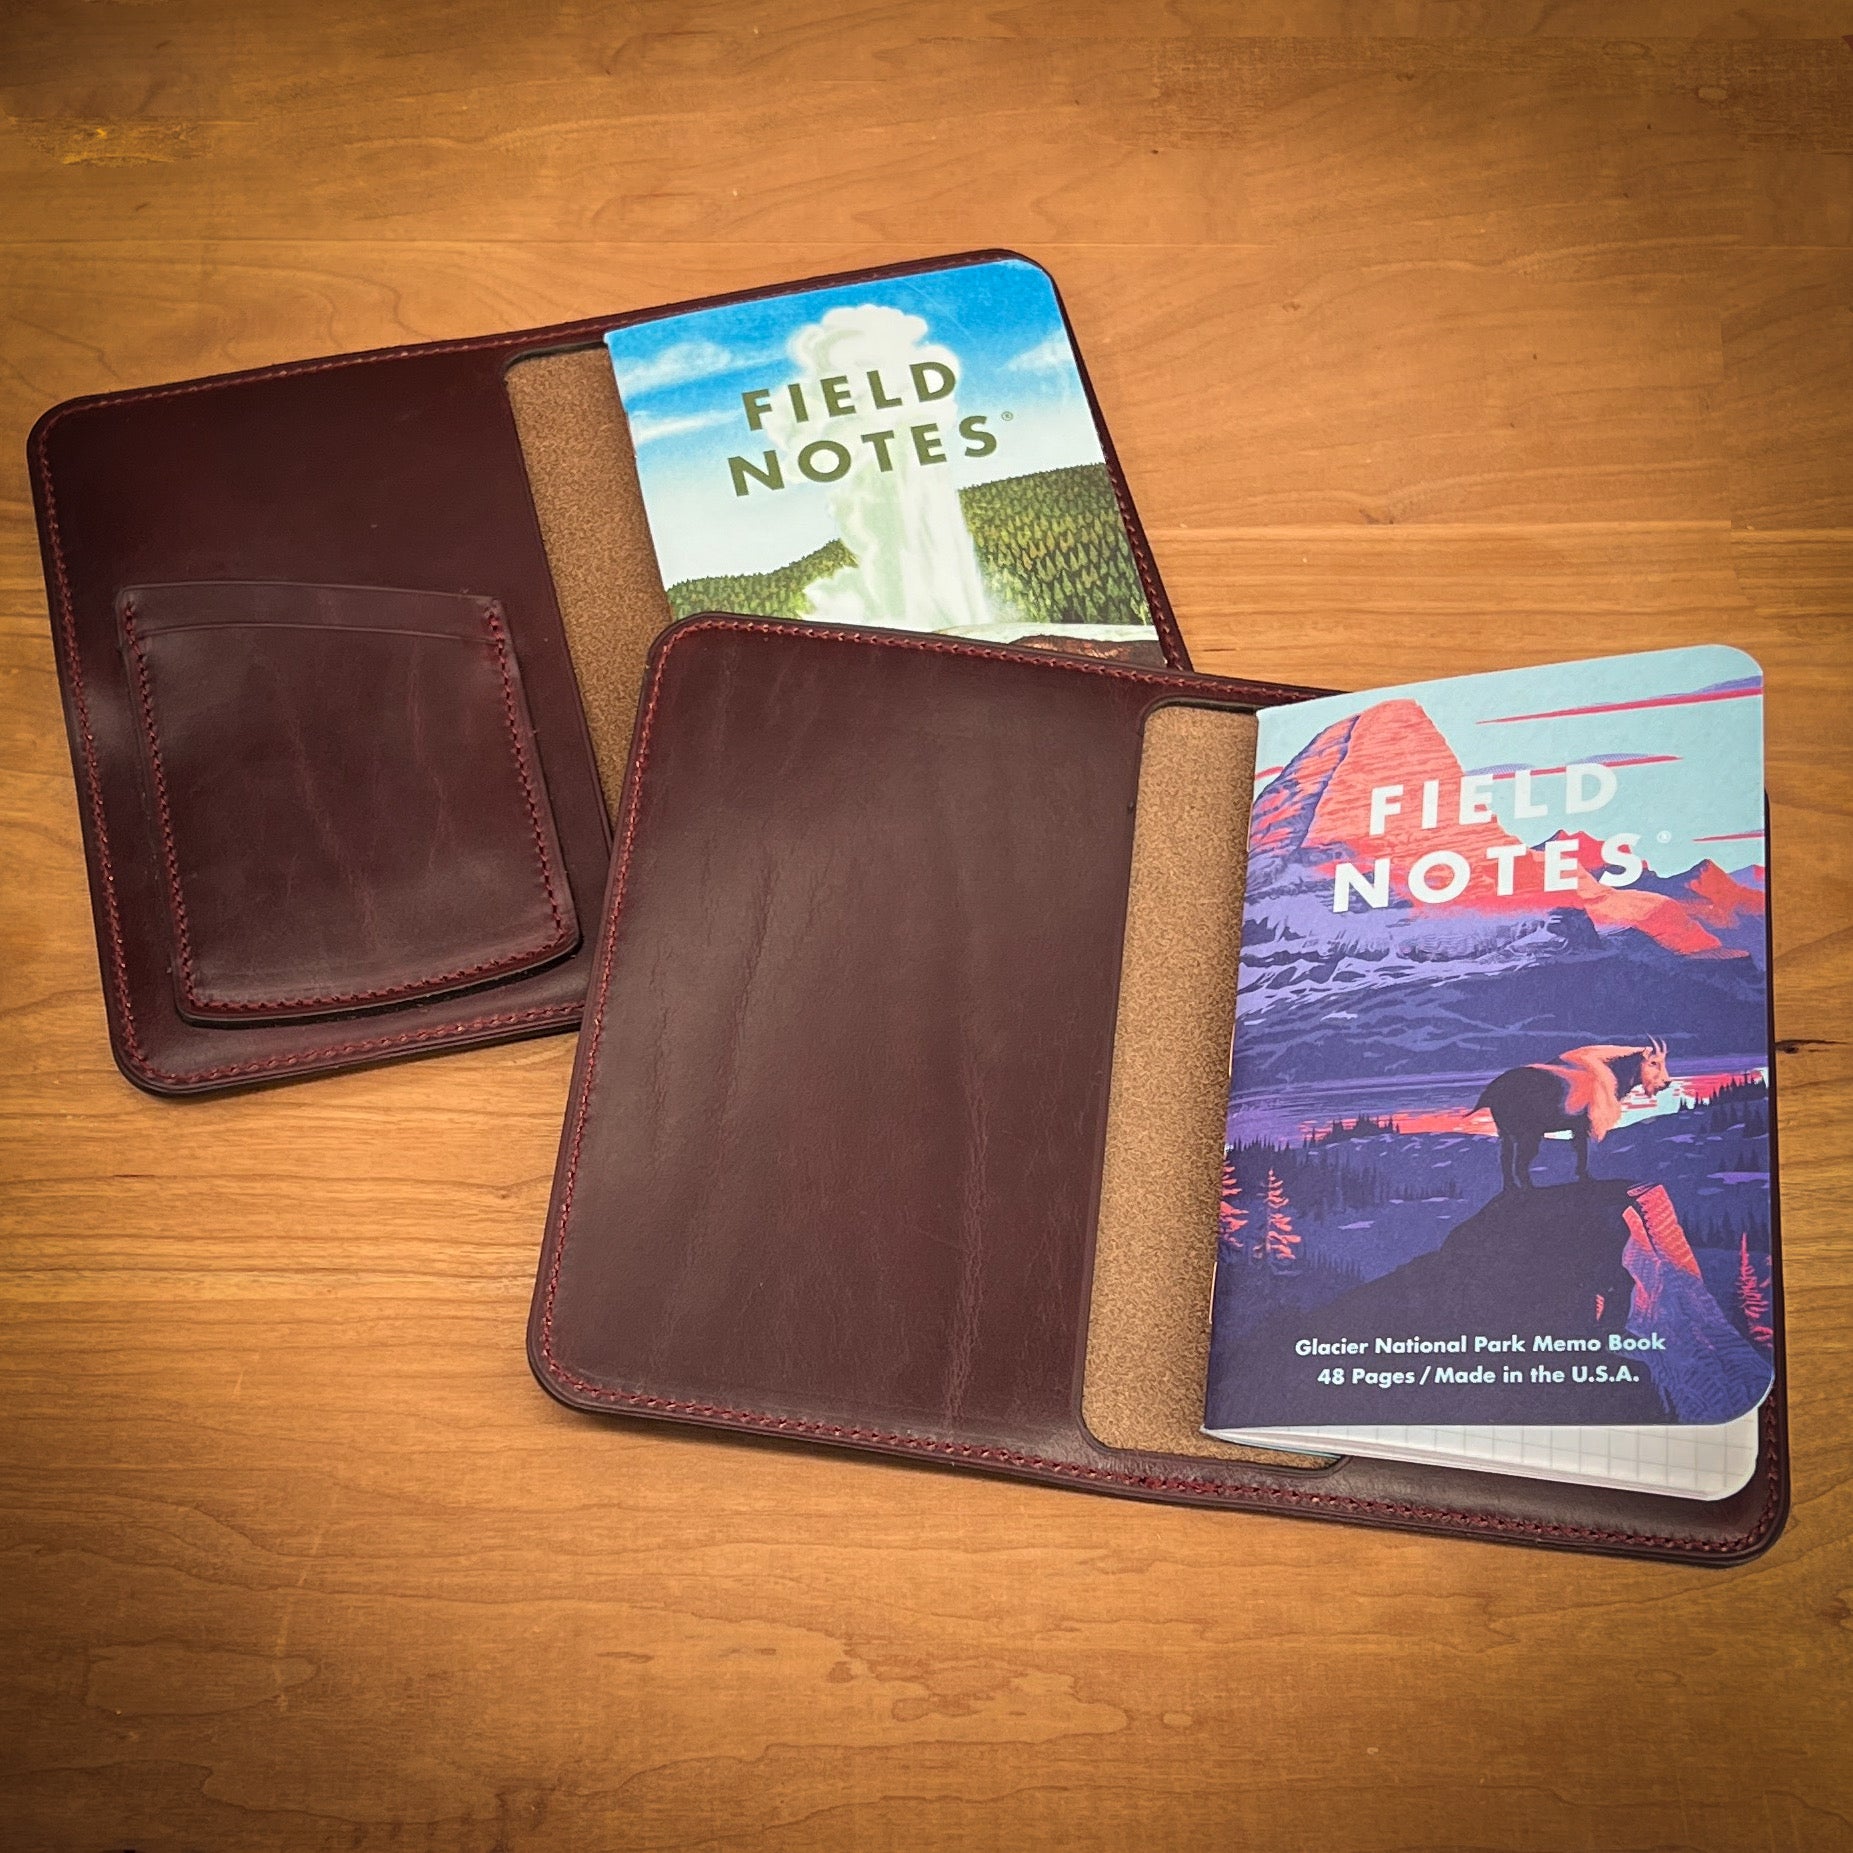 Two Russet Brown Horween Leather Notebook Covers.  One cover has two credit card pockets and the other cover has no credit card pockets.  Both covers contain Field Notes refills.  Handmade by Custom Leather and Pen in Houston, TX